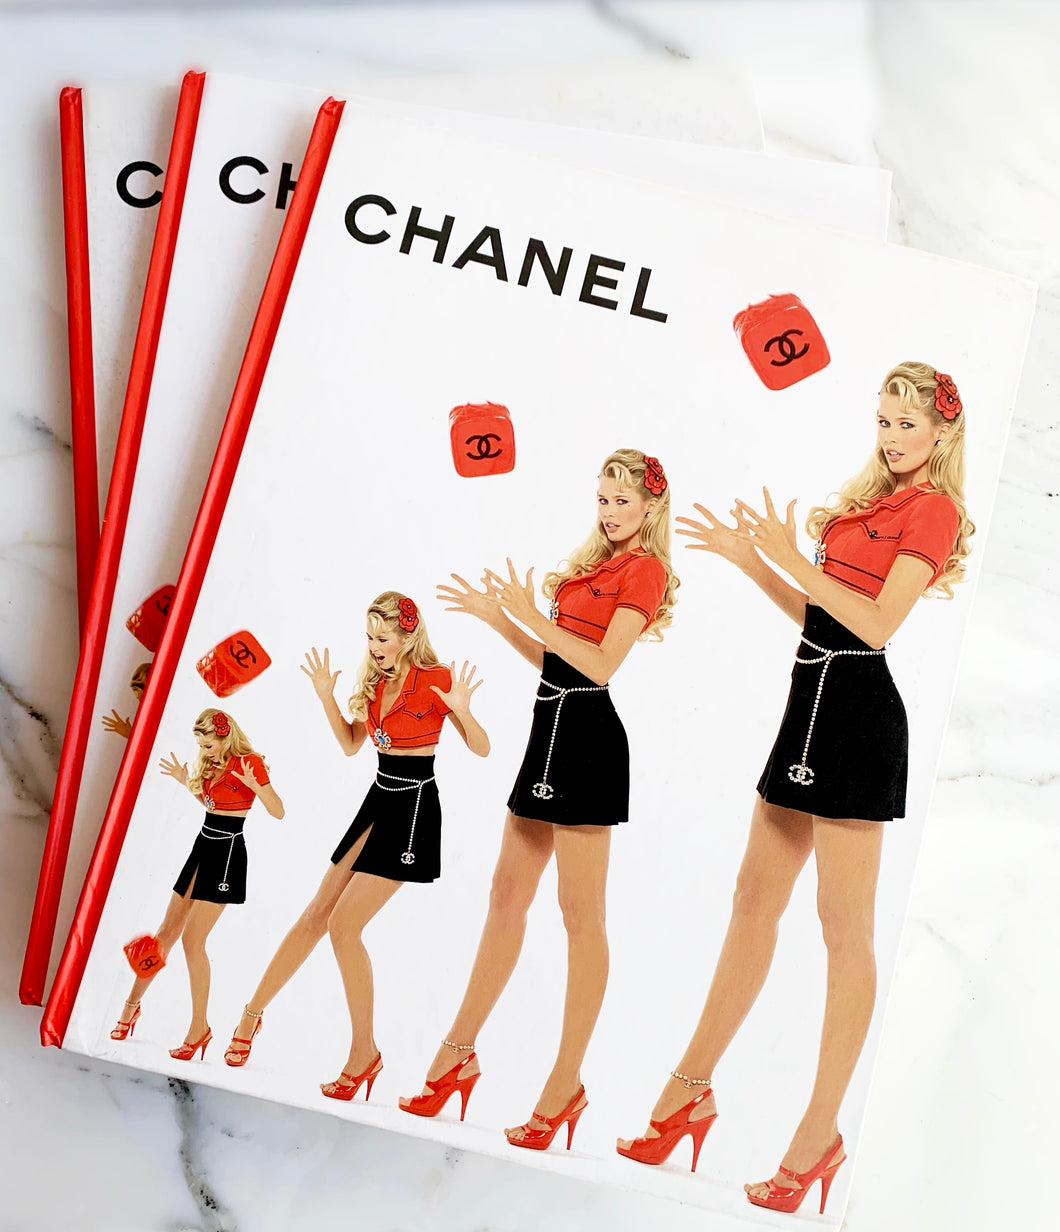 CHANEL BARBIE 1995 SPRING COLLECTION HARDCOVER CATALOGUE CLAUDIA SCHIFFER